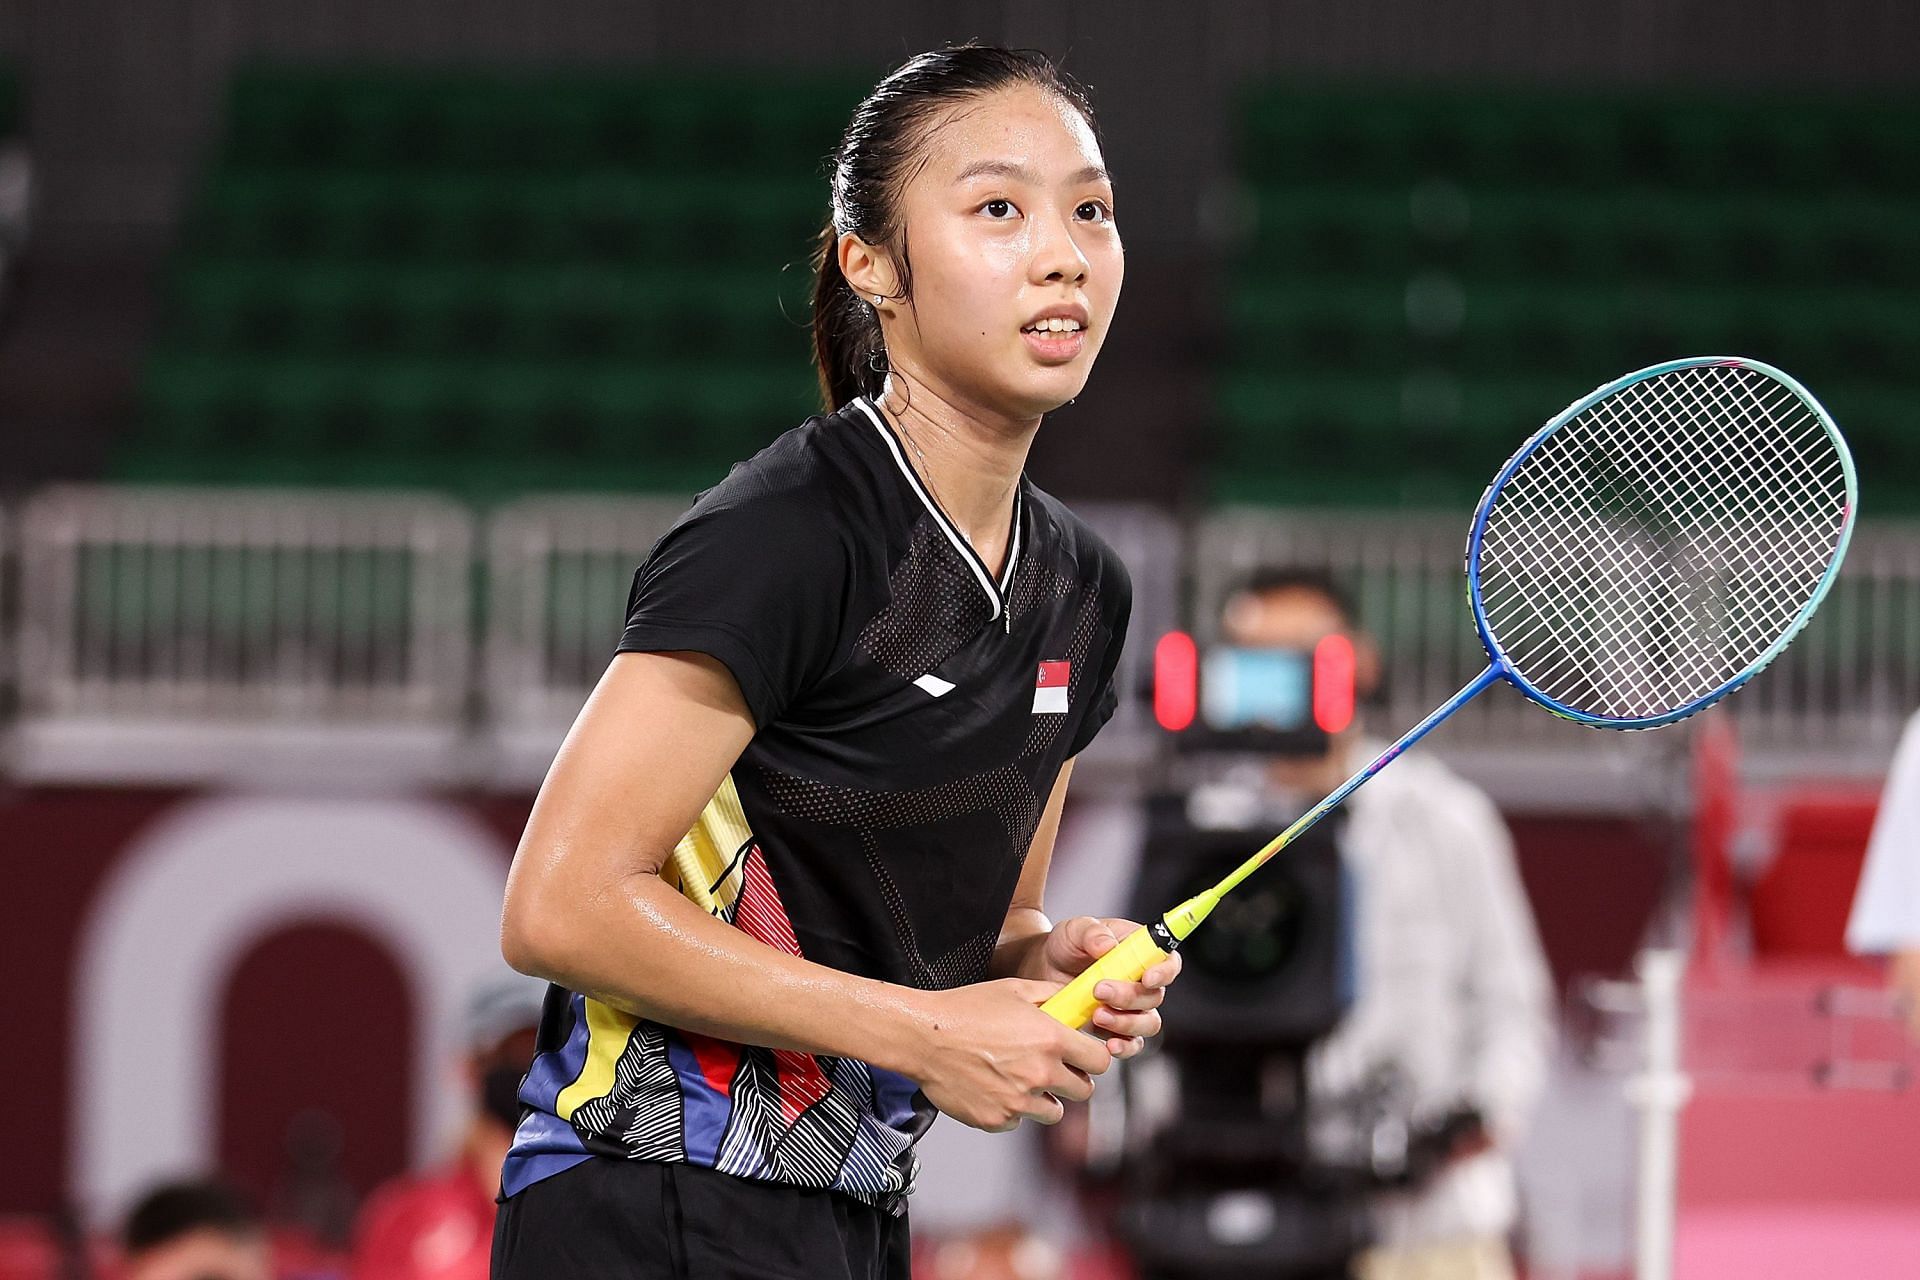 Yeo Jia Min of Singapore in action at the Tokyo Olympics